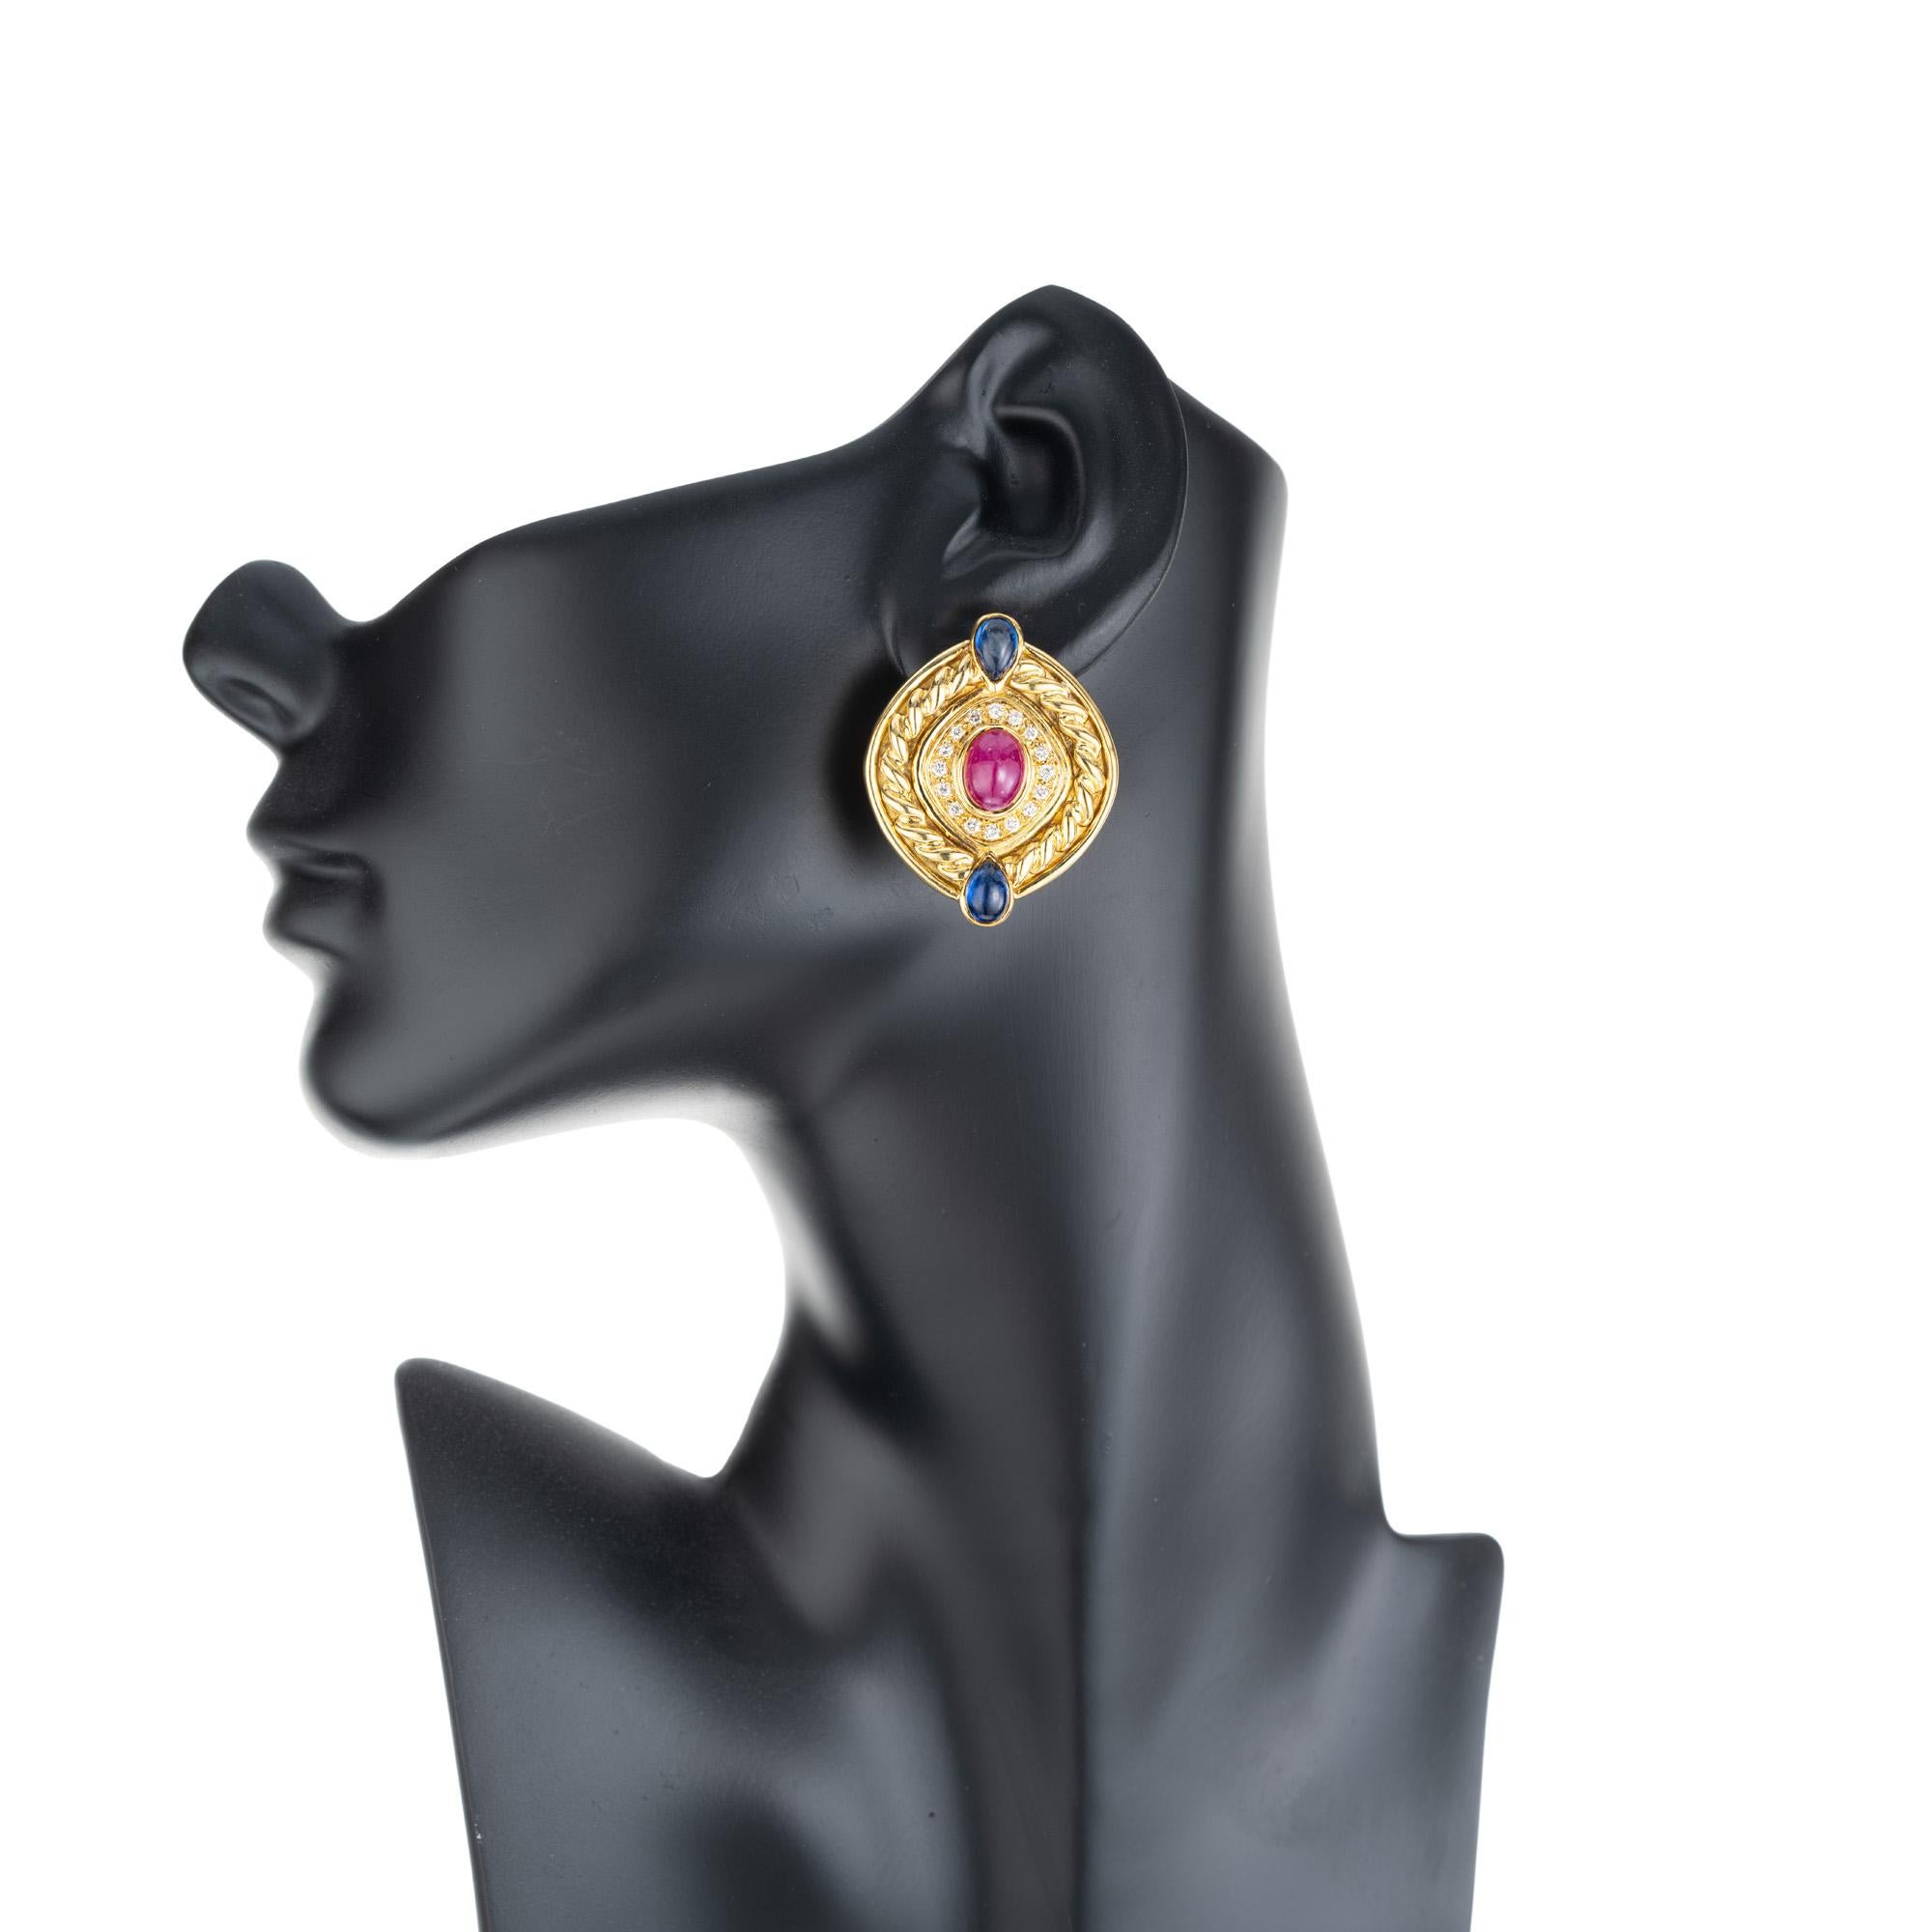 7.50 Carat Ruby Sapphire Diamond Swirl Button Gold Clip Post Earrings In Good Condition For Sale In Stamford, CT